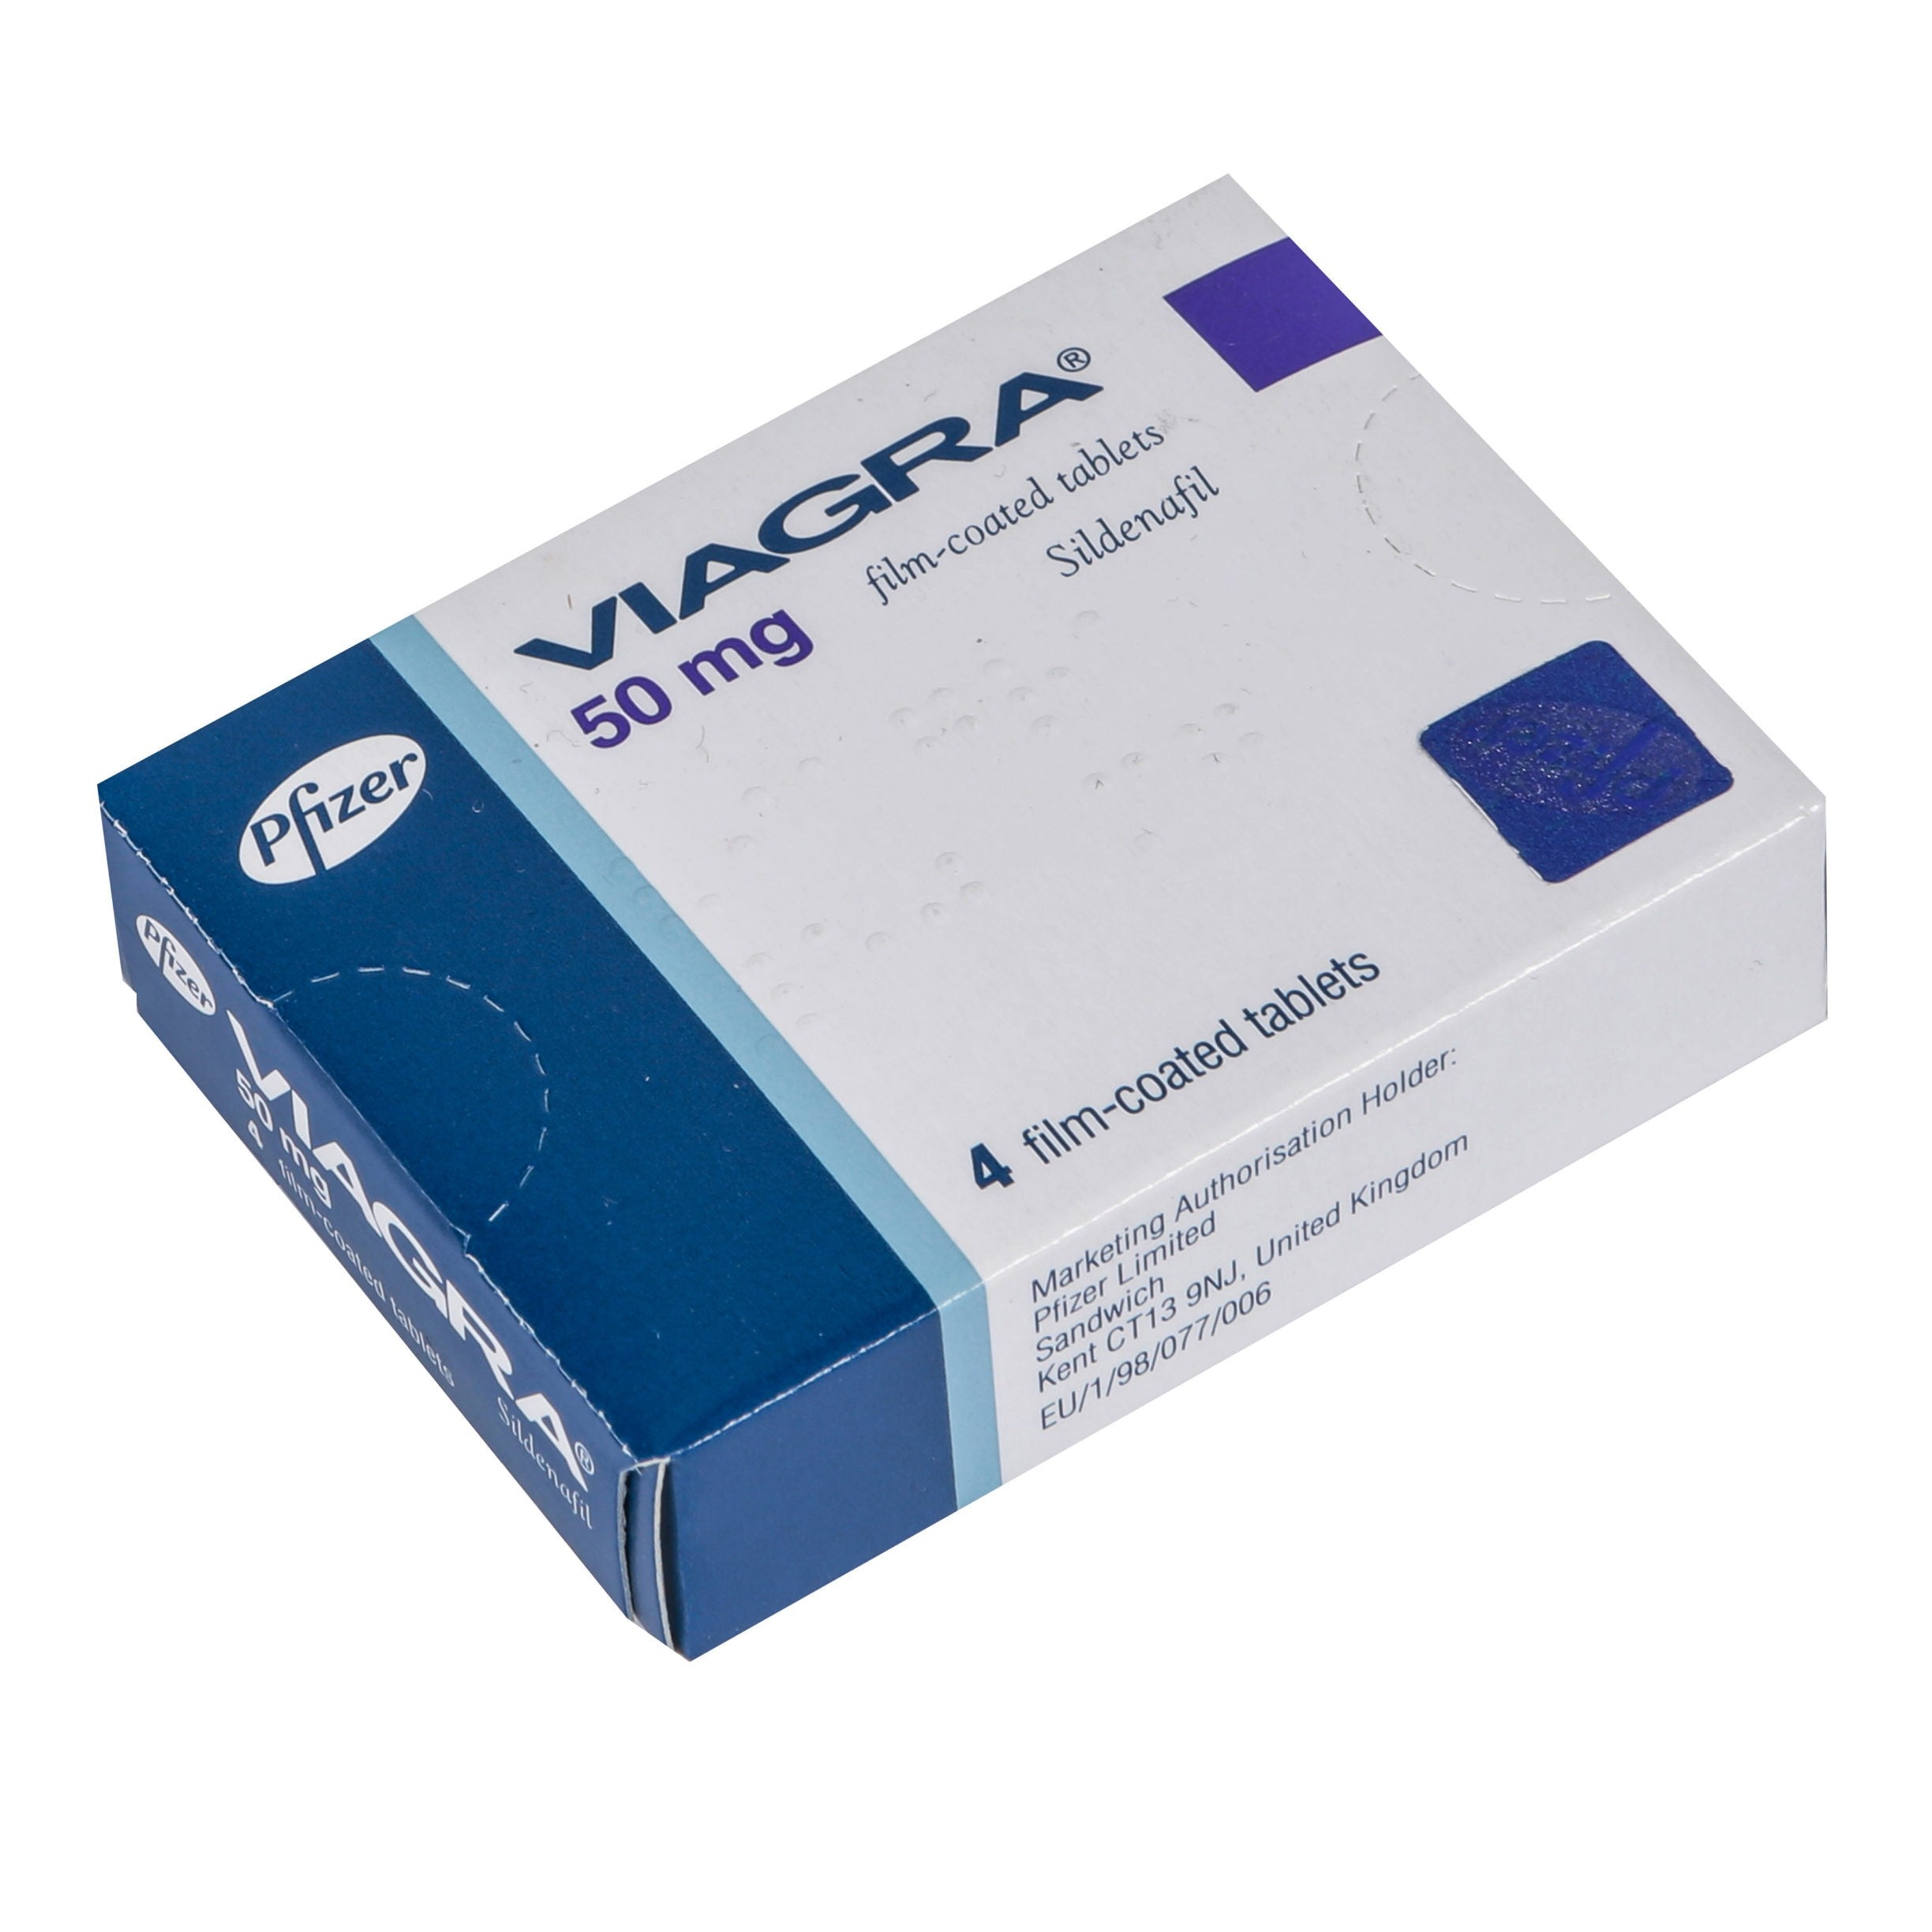 UK Imported Viagra 100mg 4 Tablets Available in Pakistan– Medical Mart  Pharmacy & Smart Store